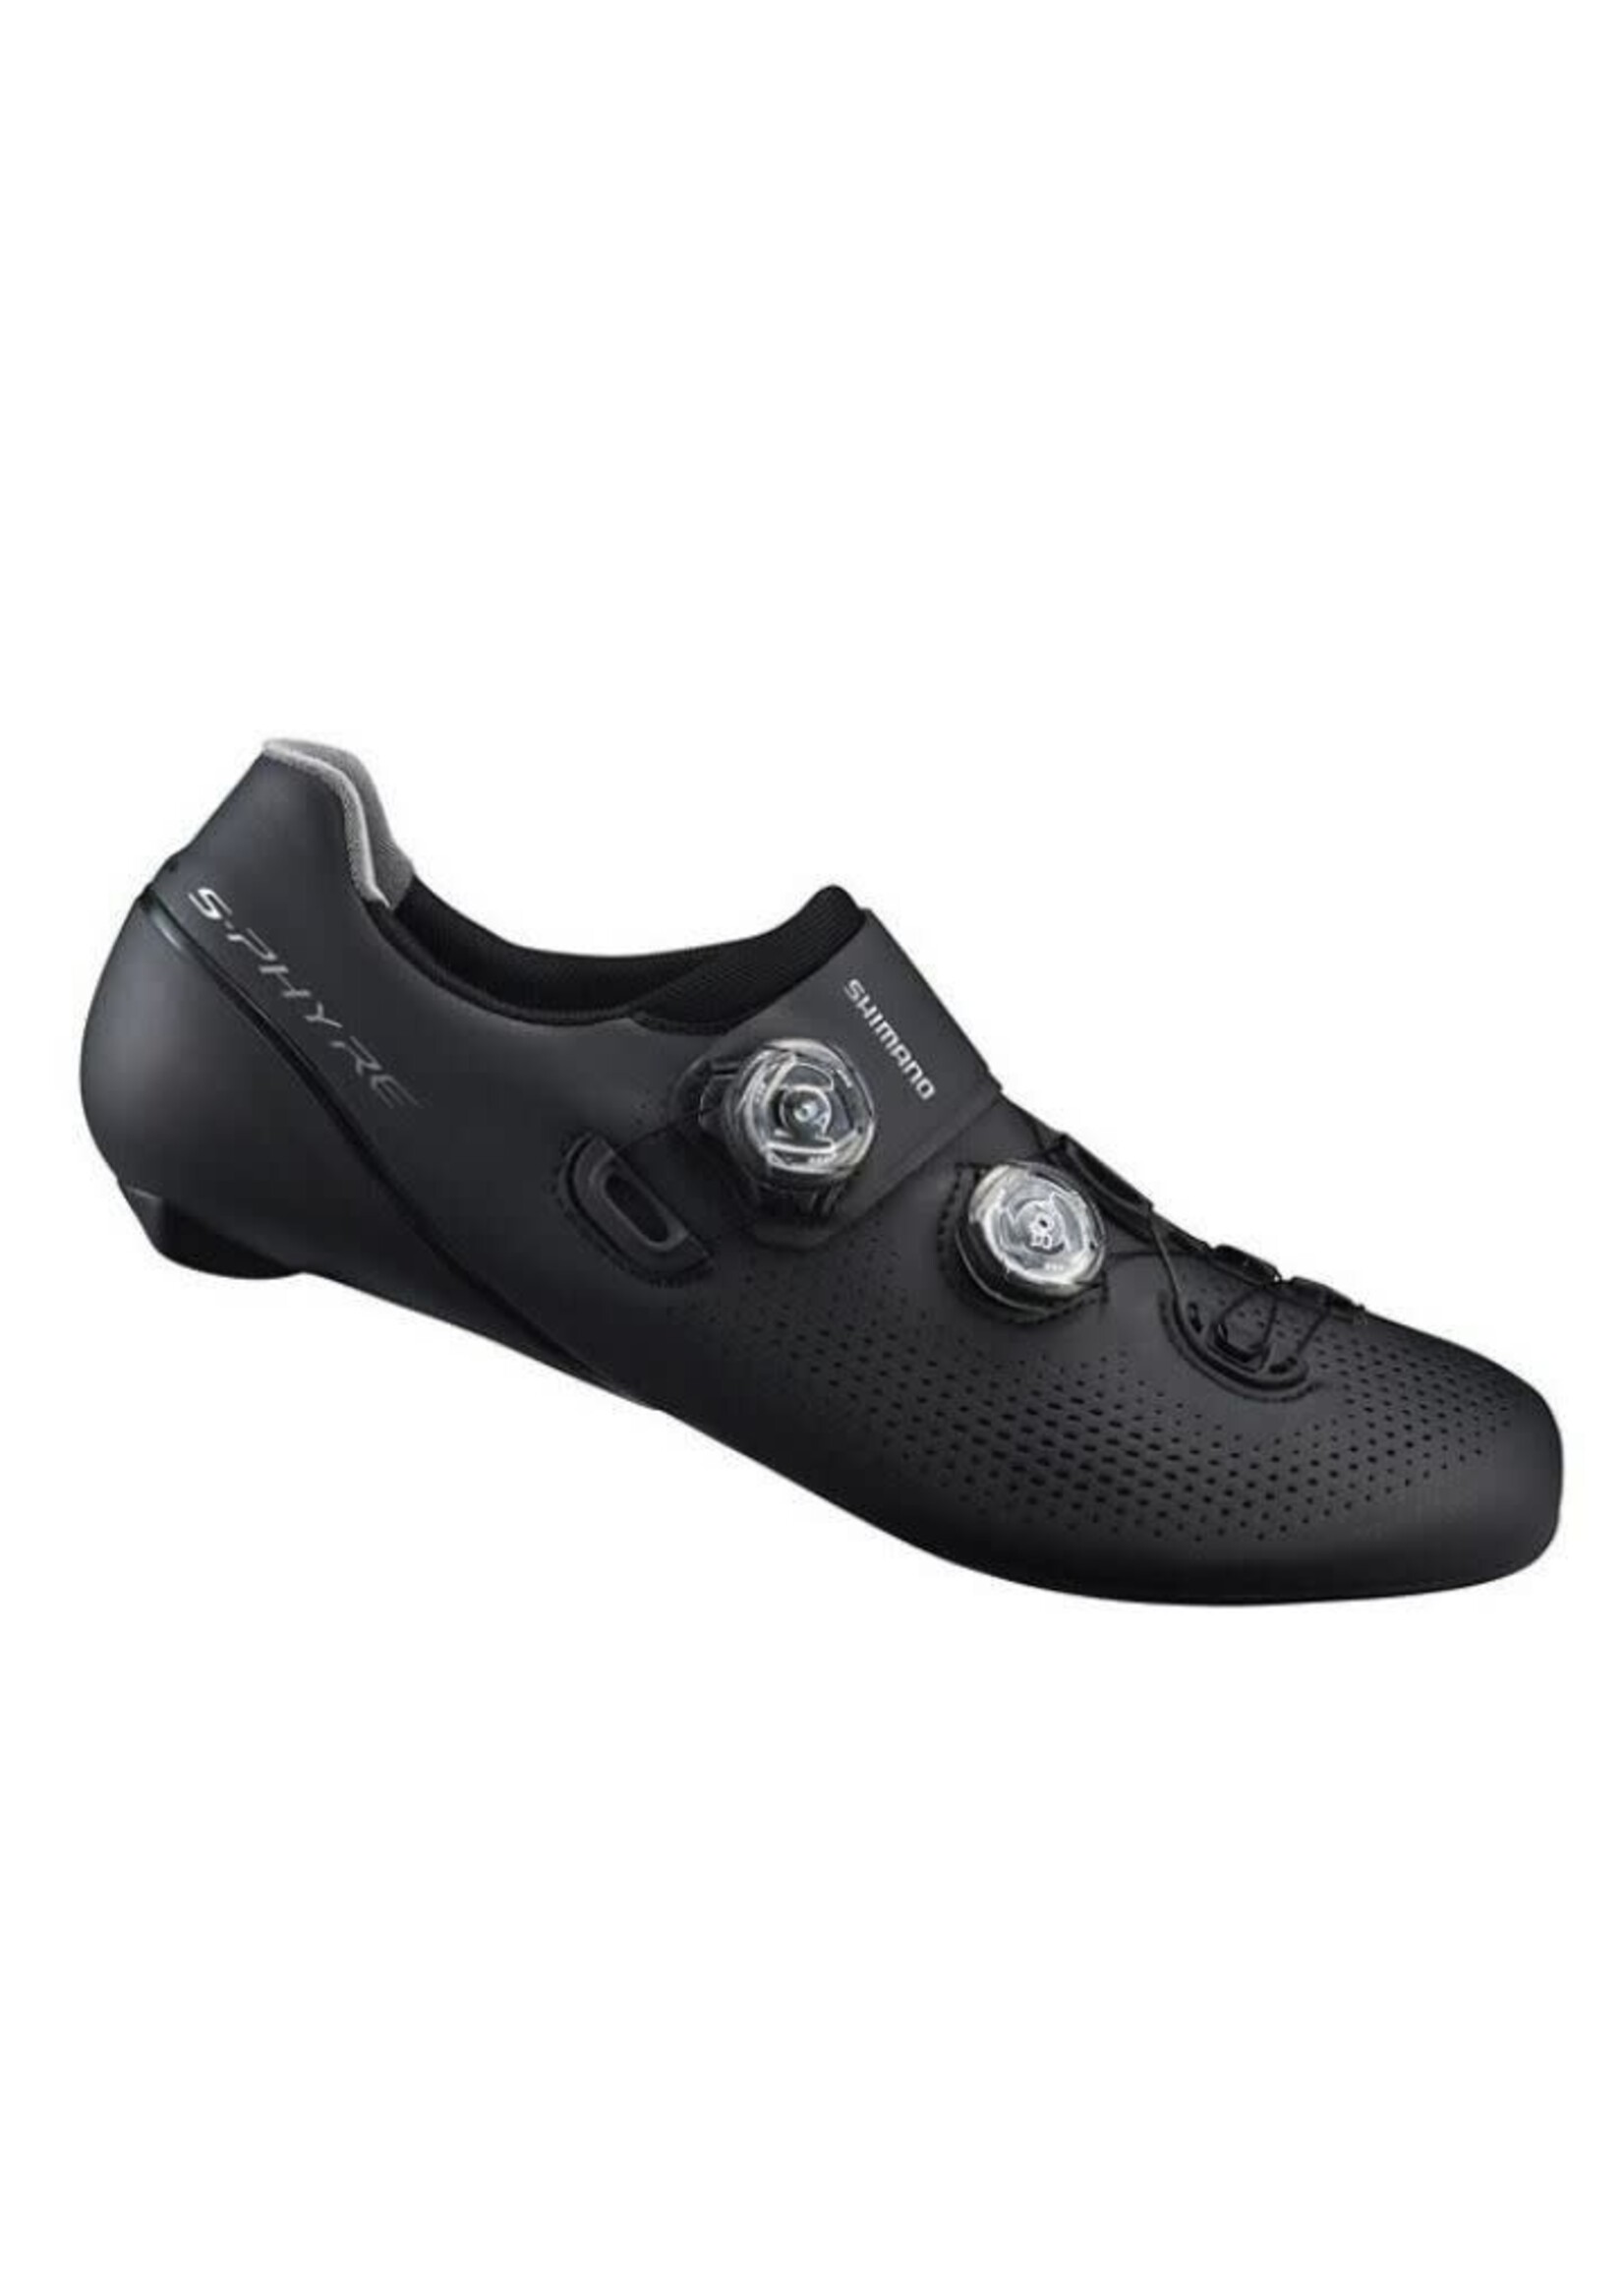 Shimano SH-RC901 S-PHYRE BICYCLE SHOES BLACK 40.0